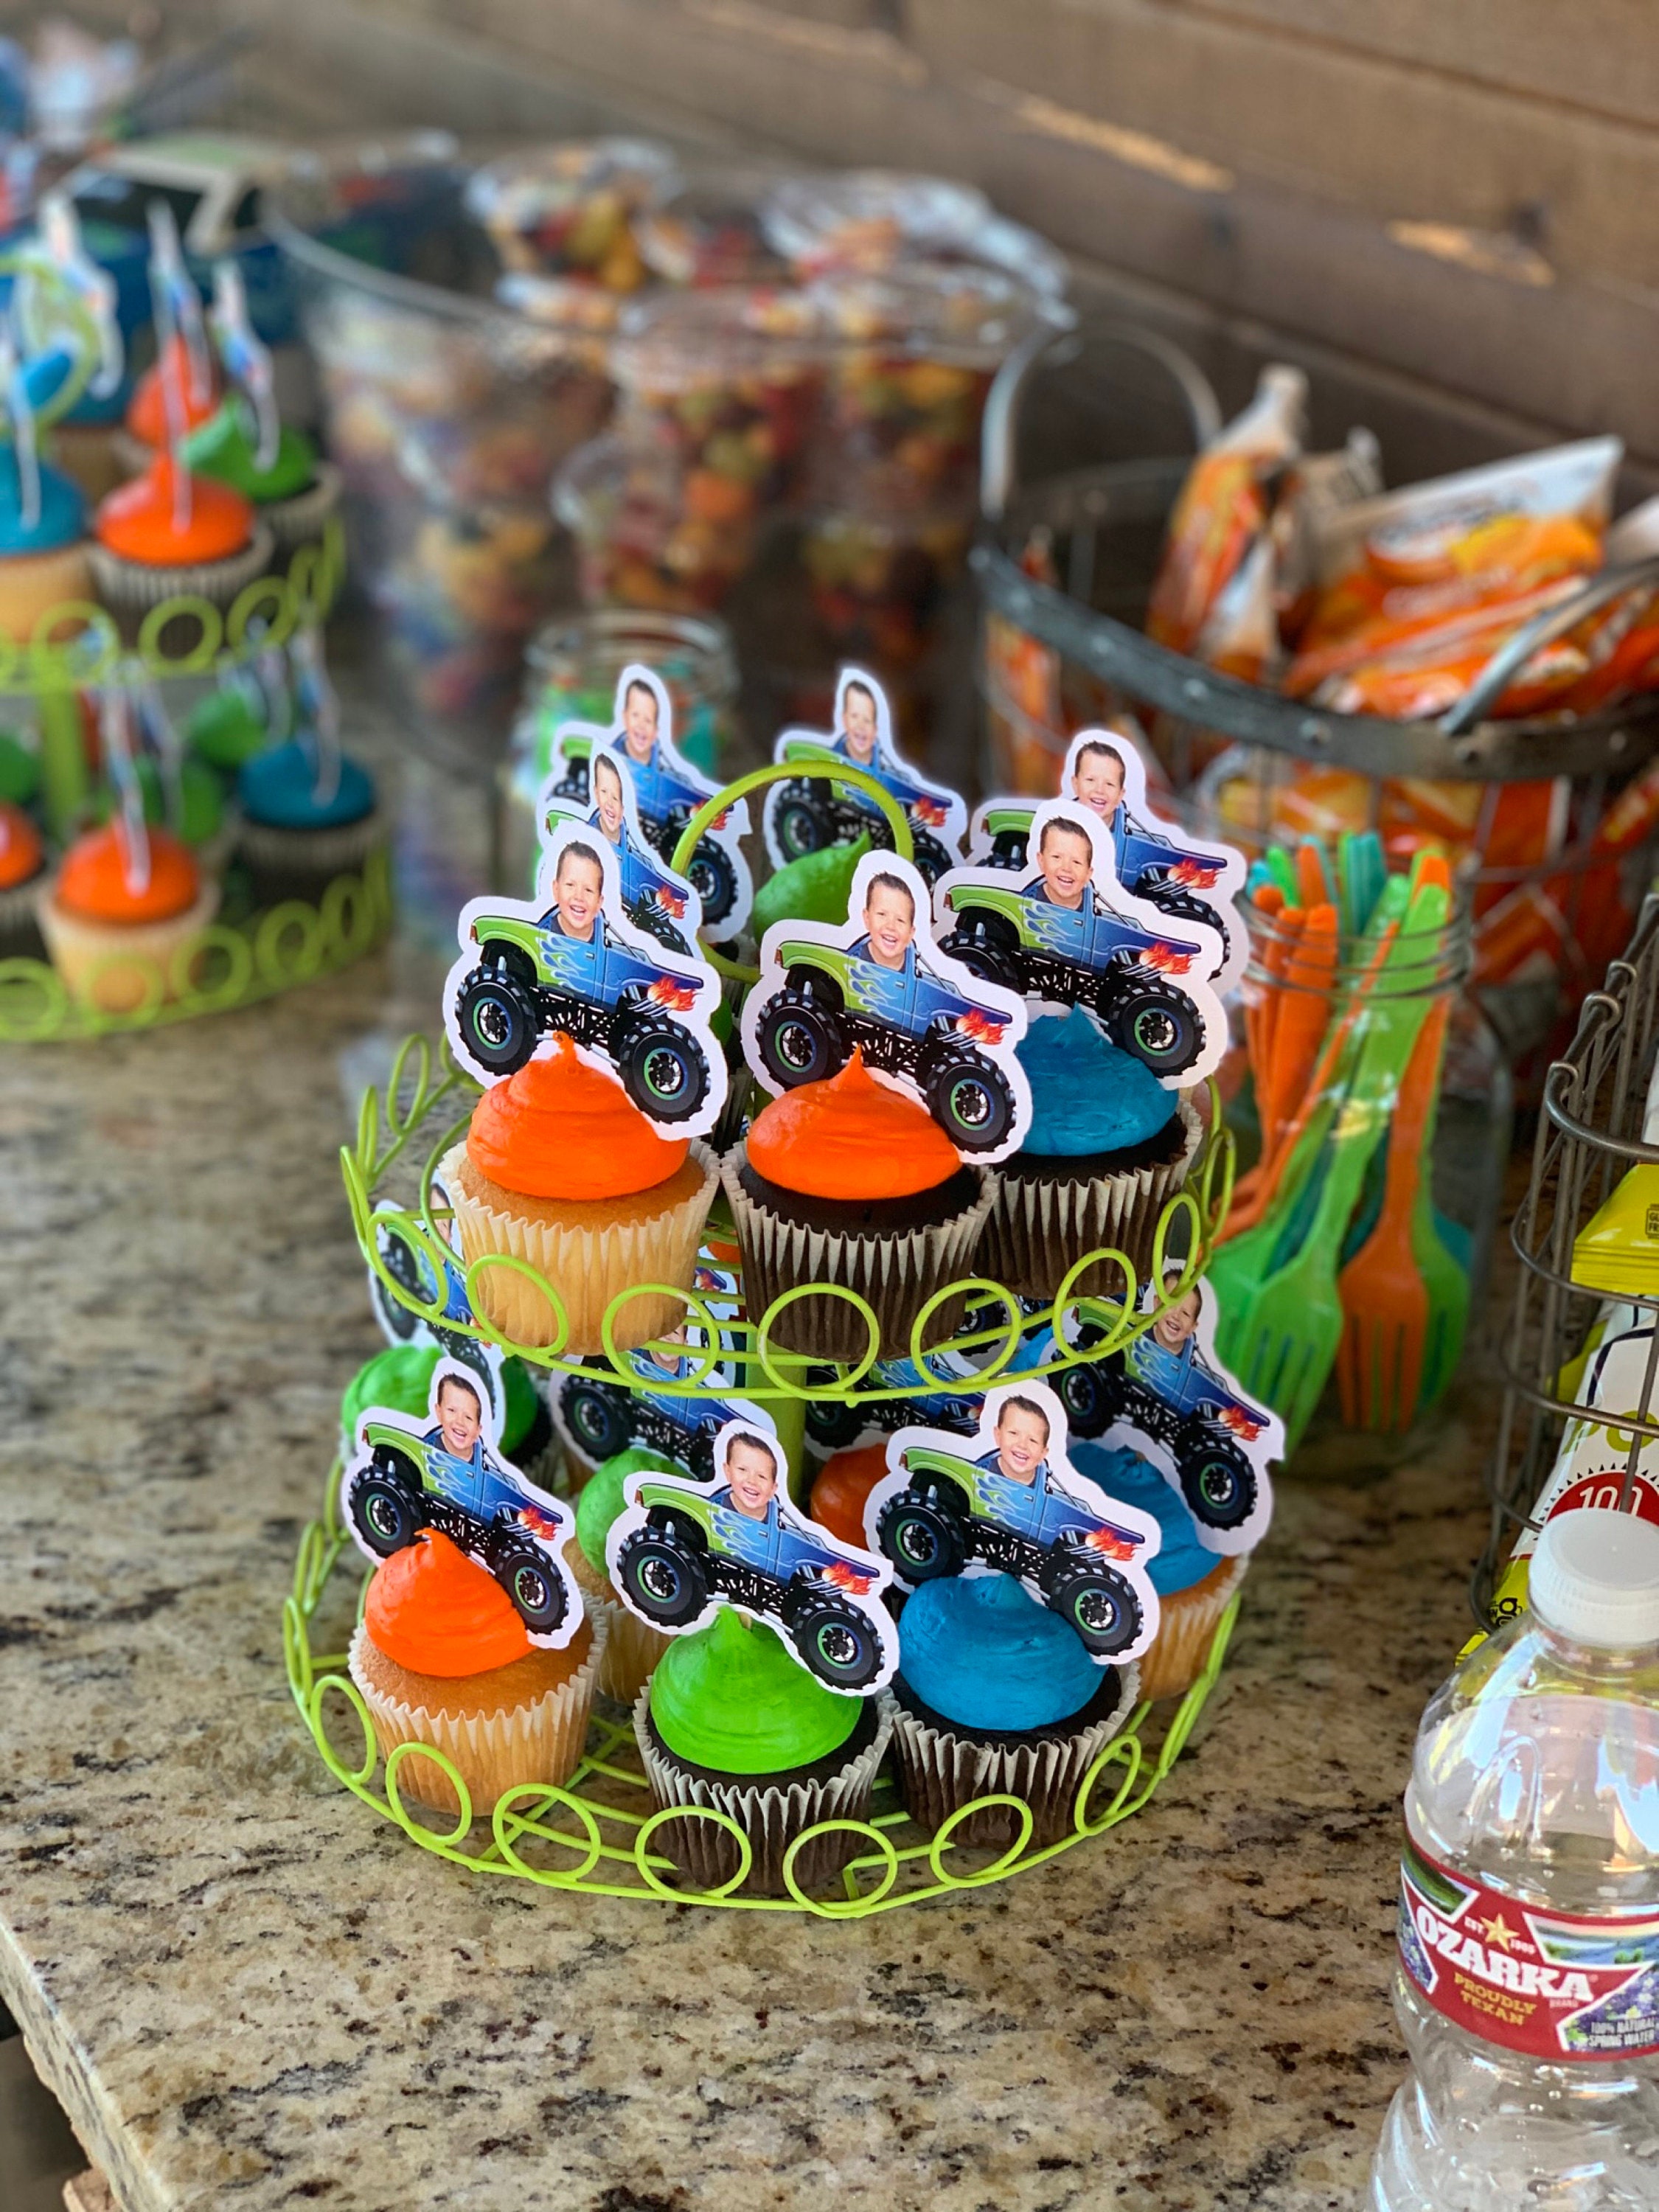 Monster Truck Party Photo Cupcake Toppers, Monster Truck Face Cupcake Toppers, Party Decorations, Monster Truck Party Favors